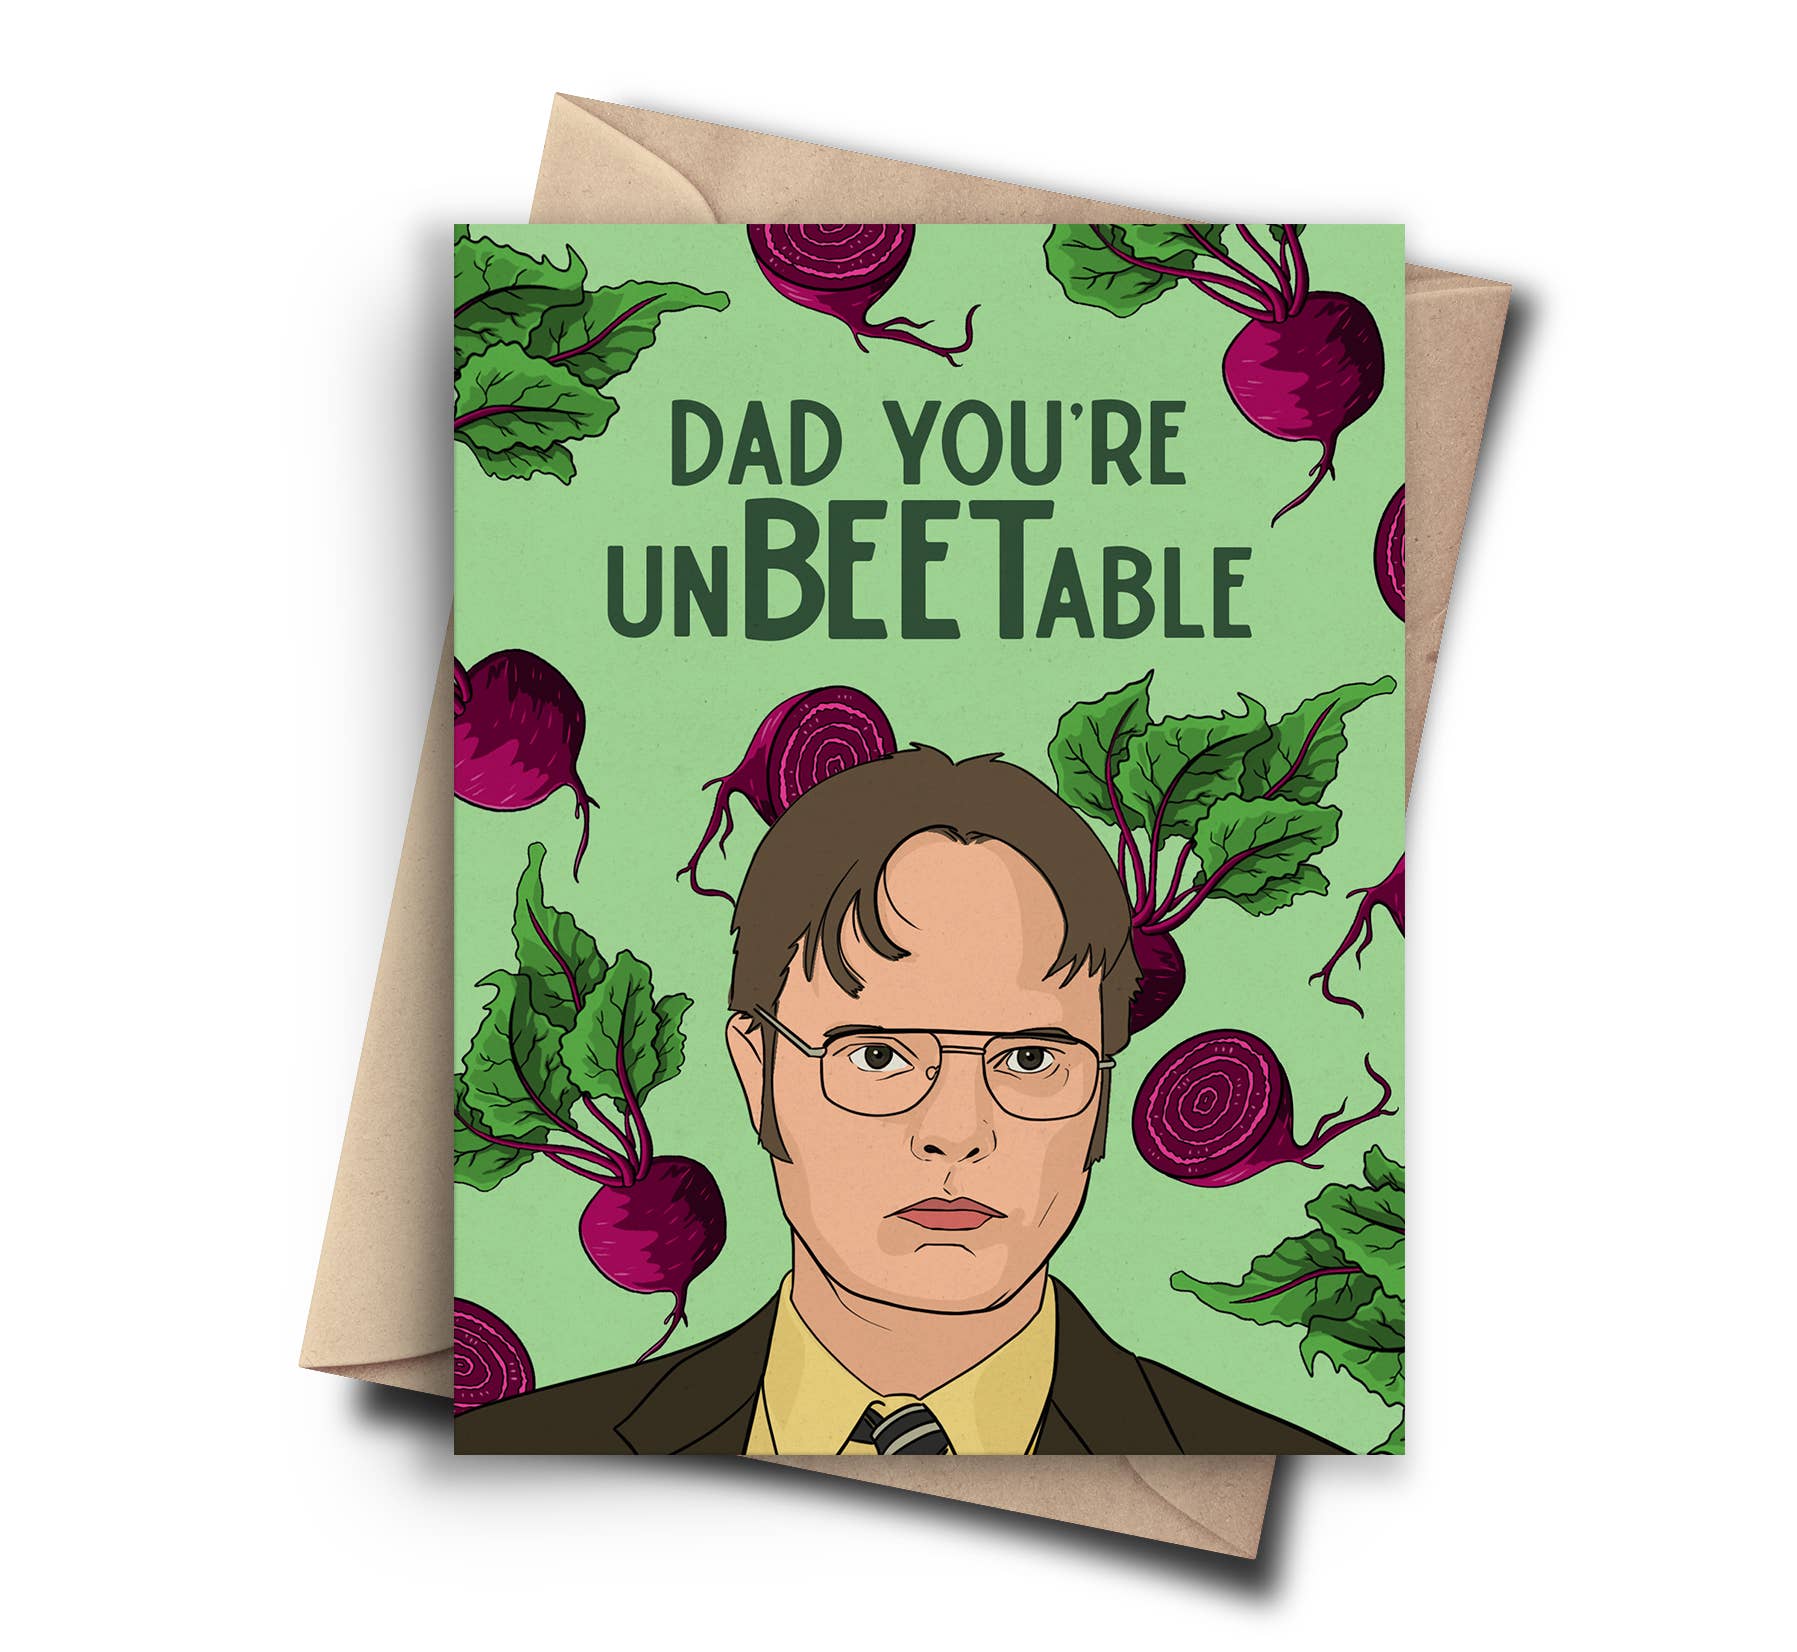 Dad Joke Funny Fathers Day Card - The Office Birthday Card Pop Cult Paper Floret + Foliage